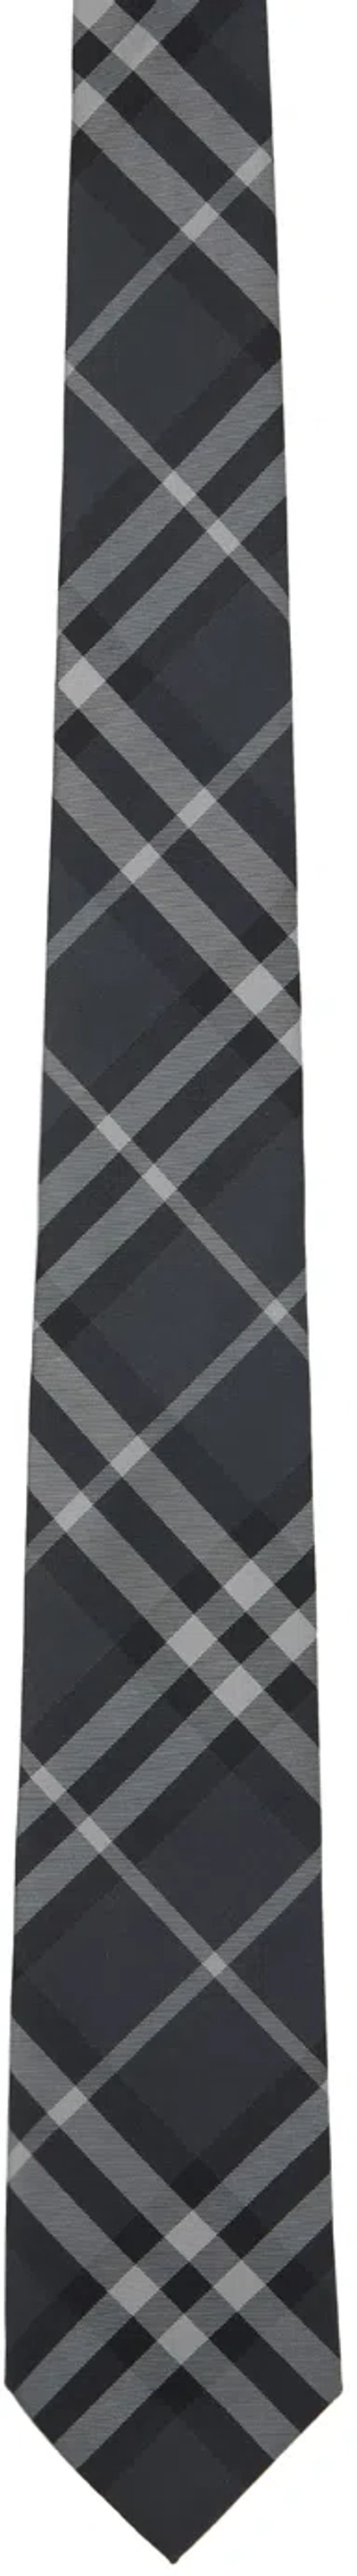 Burberry Grey Check Tie In Charcoal